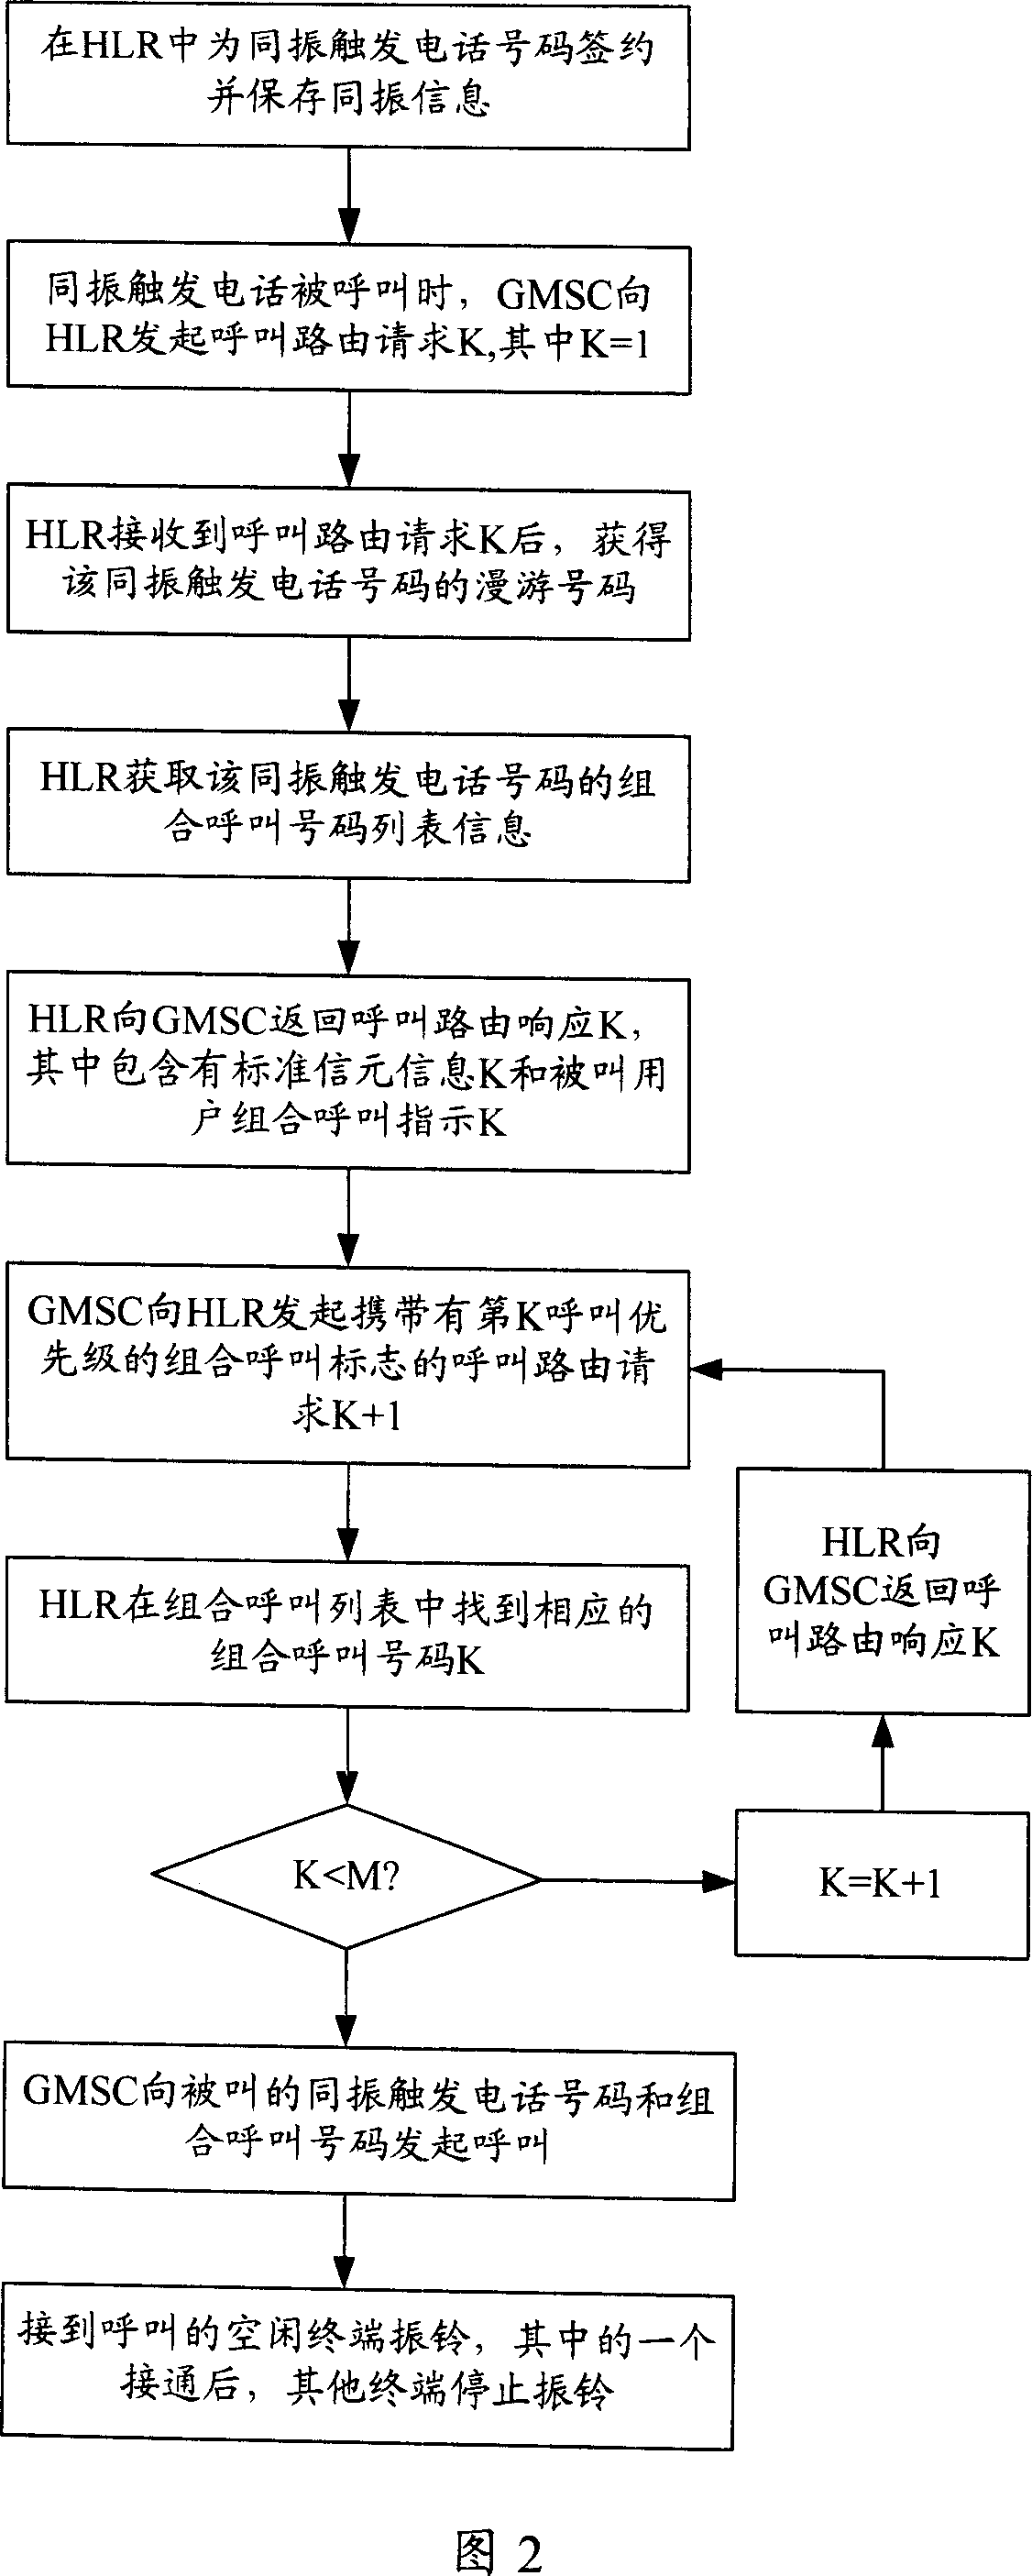 Multi-user co-vibrating system and method realized by mobile core network